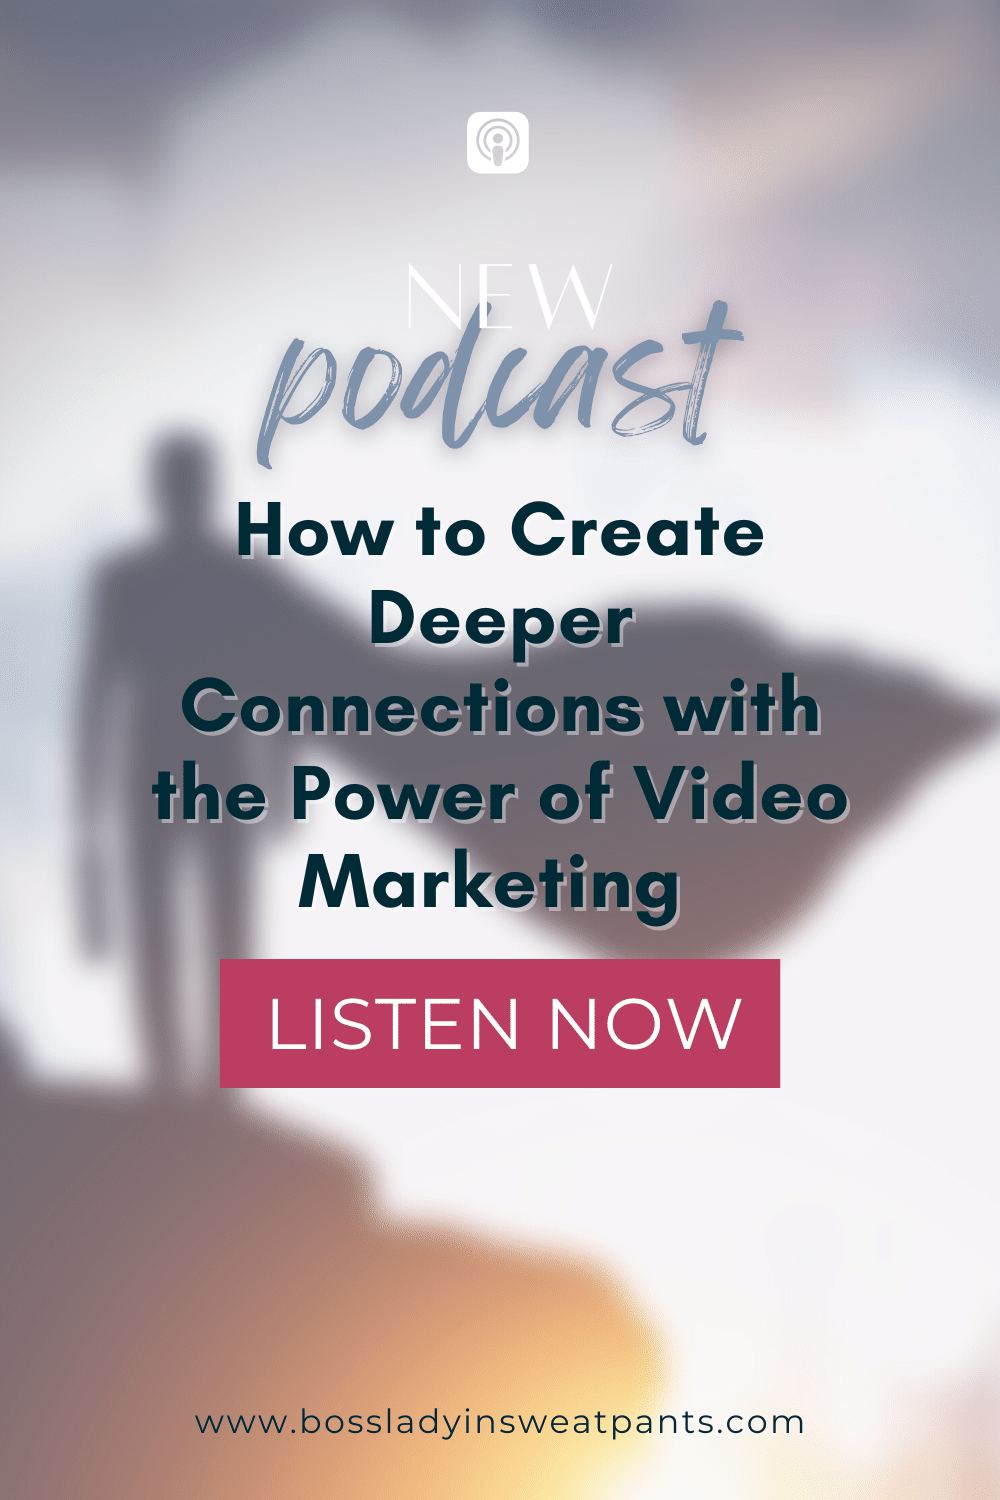 faded photo graphic that looks like superman, new episode on the podcast: How to Create Deeper Connections with the Power of Video Marketing